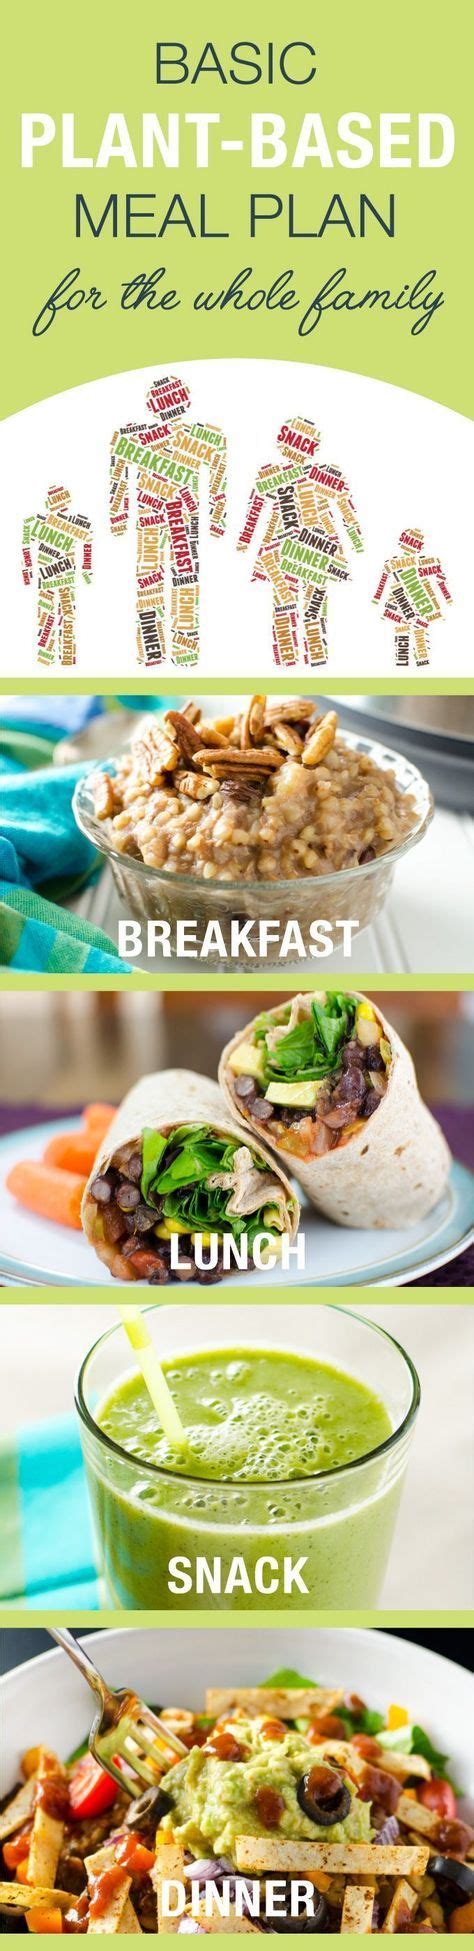 When you get on board with our plant based weekly meal plans, we do the planning for you. Basic Plant-Based Meal Plan: Breakfast, Lunch, Snack and ...